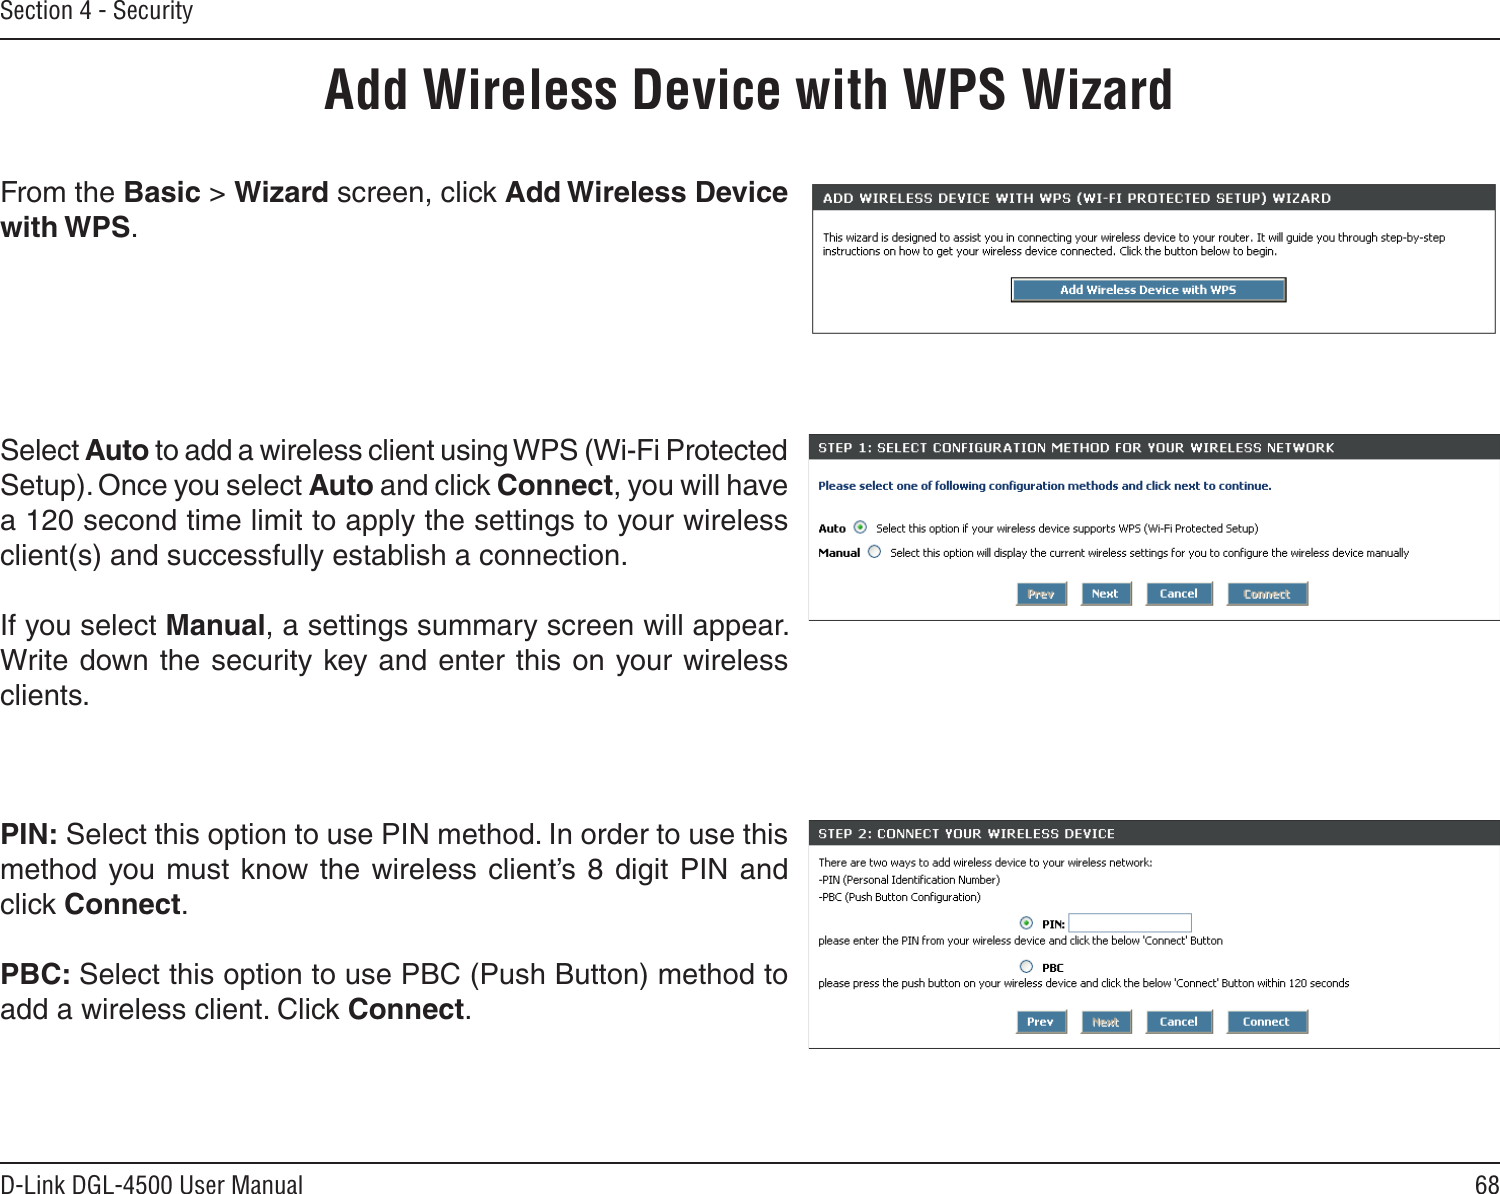 68D-Link DGL-4500 User ManualSection 4 - SecurityFrom the Basic &gt; Wizard screen, click Add Wireless Device with WPS.Add Wireless Device with WPS WizardPIN: Select this option to use PIN method. In order to use this method you  must know the  wireless  client’s 8  digit PIN and click Connect.PBC: Select this option to use PBC (Push Button) method to add a wireless client. Click Connect.Select Auto to add a wireless client using WPS (Wi-Fi Protected Setup). Once you select Auto and click Connect, you will have a 120 second time limit to apply the settings to your wireless client(s) and successfully establish a connection. If you select Manual, a settings summary screen will appear. Write down the security key and enter this on your wireless clients. 